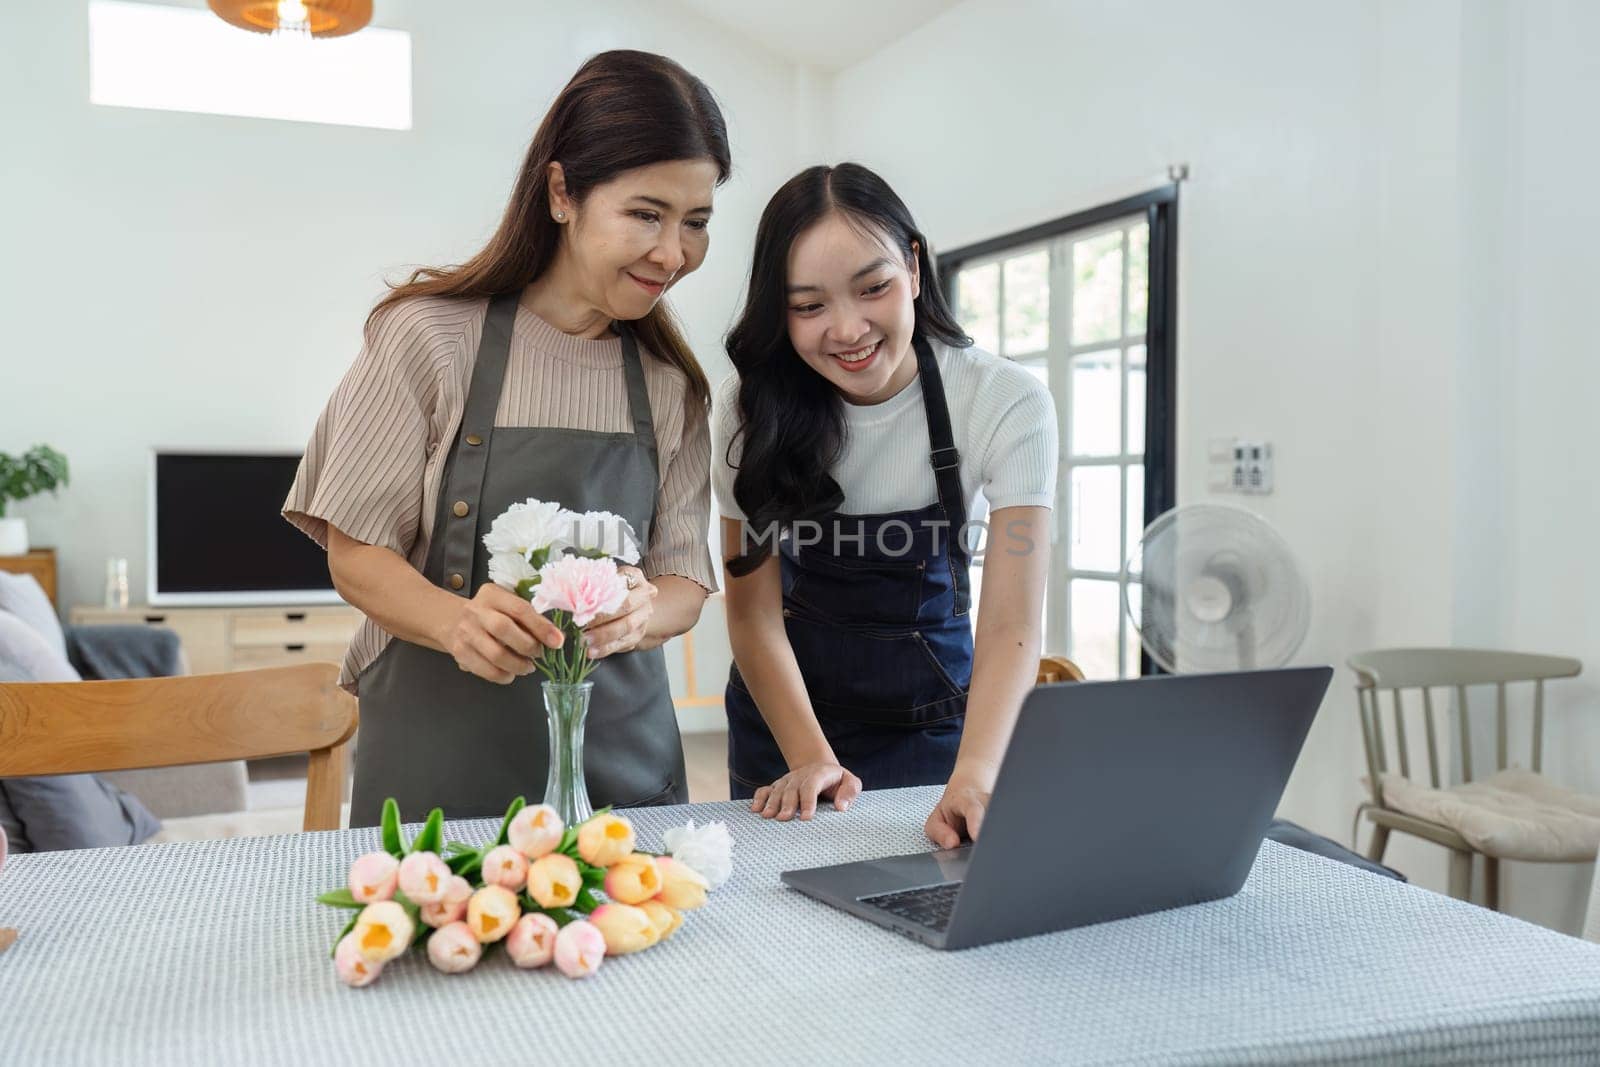 mother and daughter arrange flowers together as a hobby. mother and daughter spend free time doing flower arranging activities together and looking at laptop by itchaznong